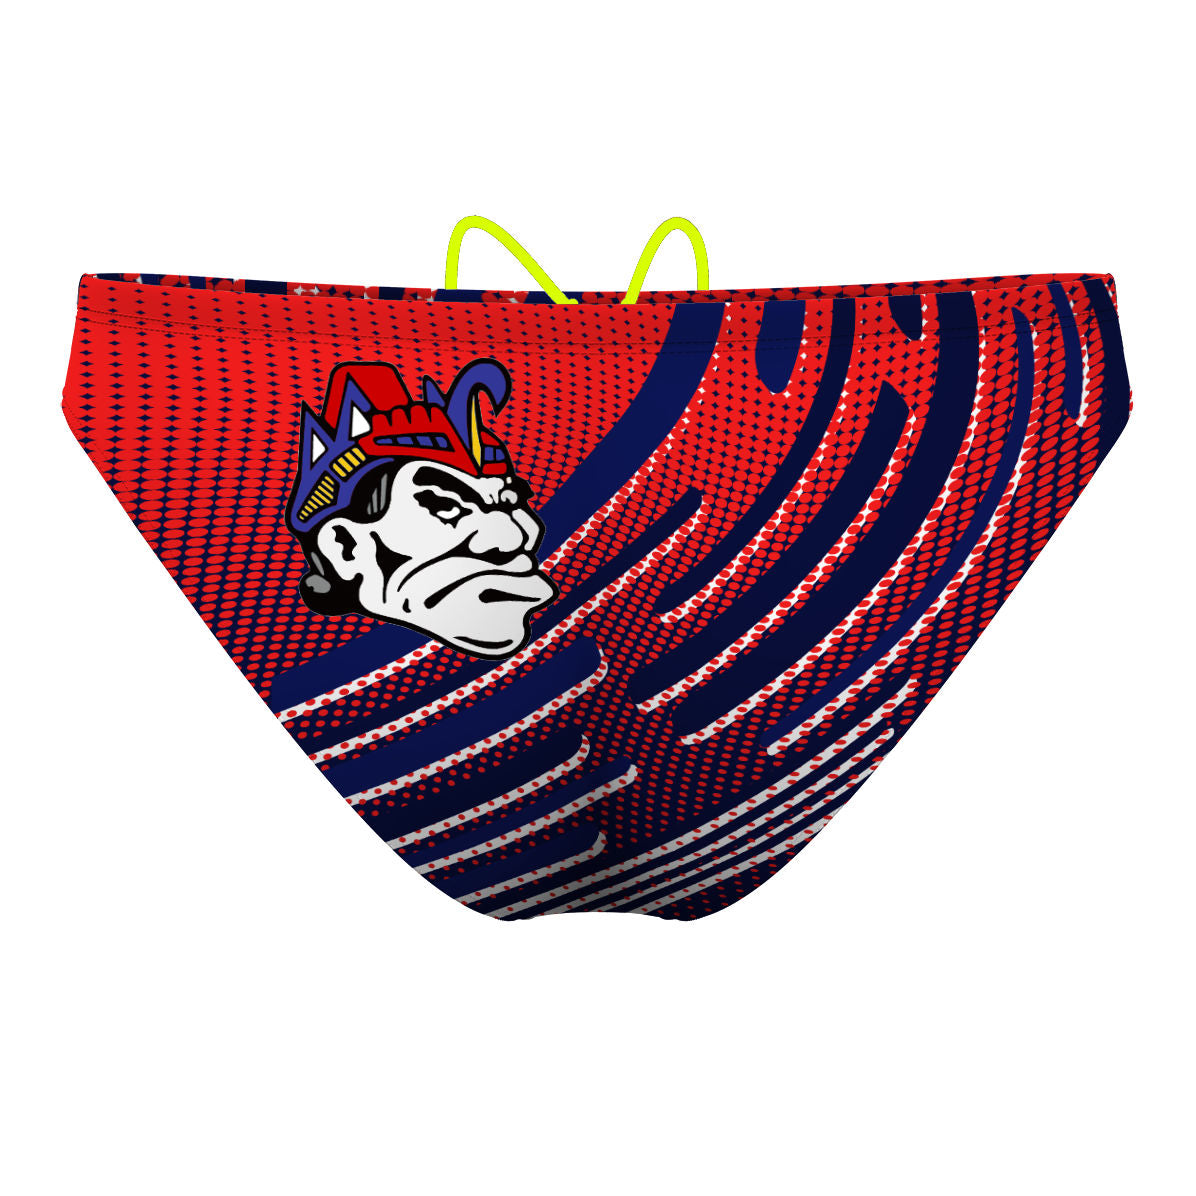 Teams Project 27 - Waterpolo Brief Swimsuit